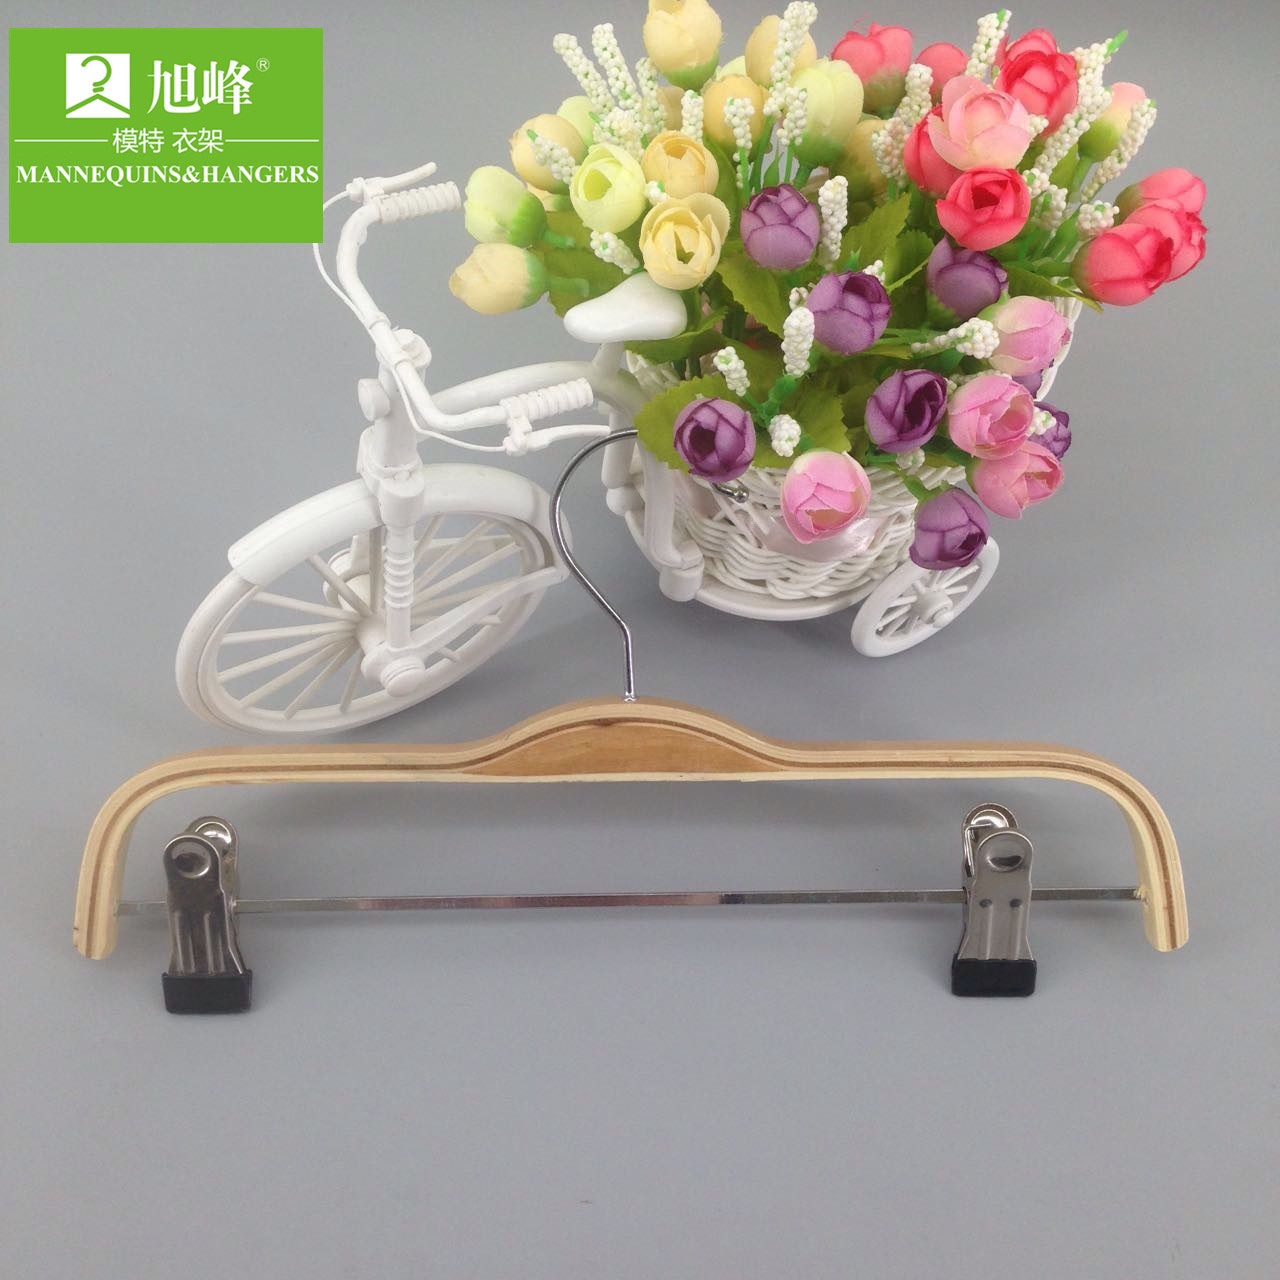 /proimages/2f0j00YEiRTQzcuwbo/xufeng-factory-trouser-hangers-wooden-material-for-kids.jpg